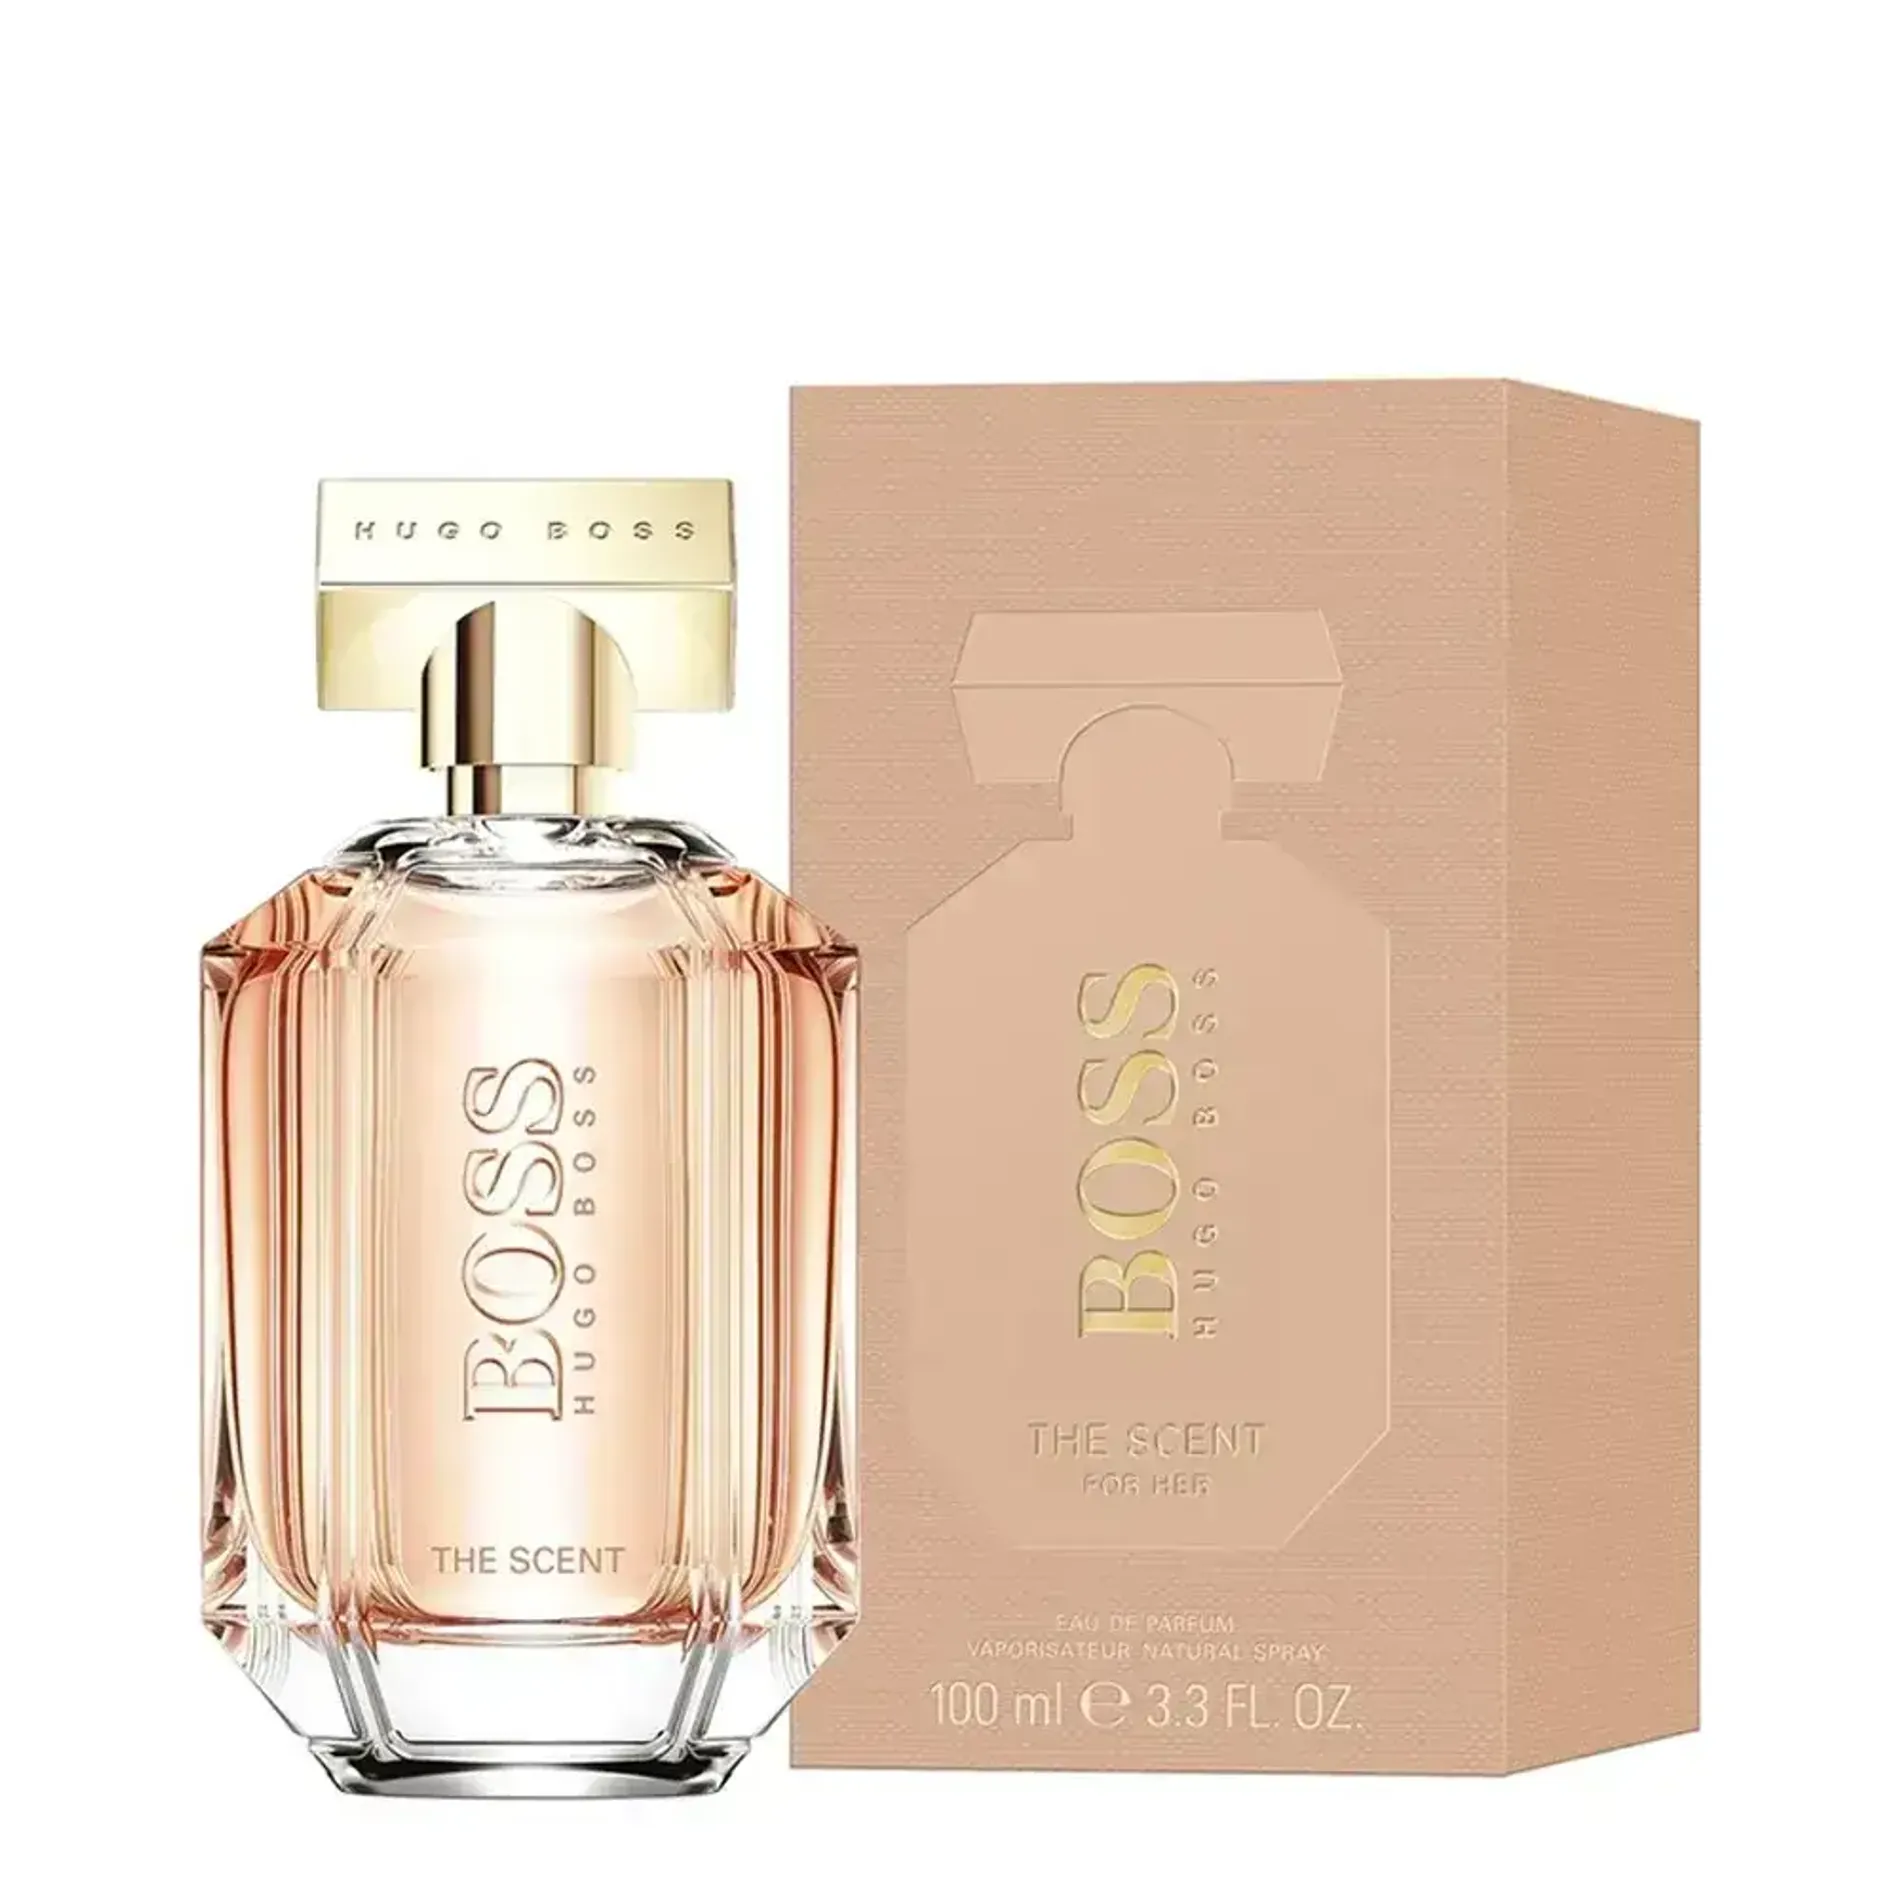 nuoc-hoa-danh-cho-nu-boss-hugo-boss-the-scent-for-her-edp-100ml-3